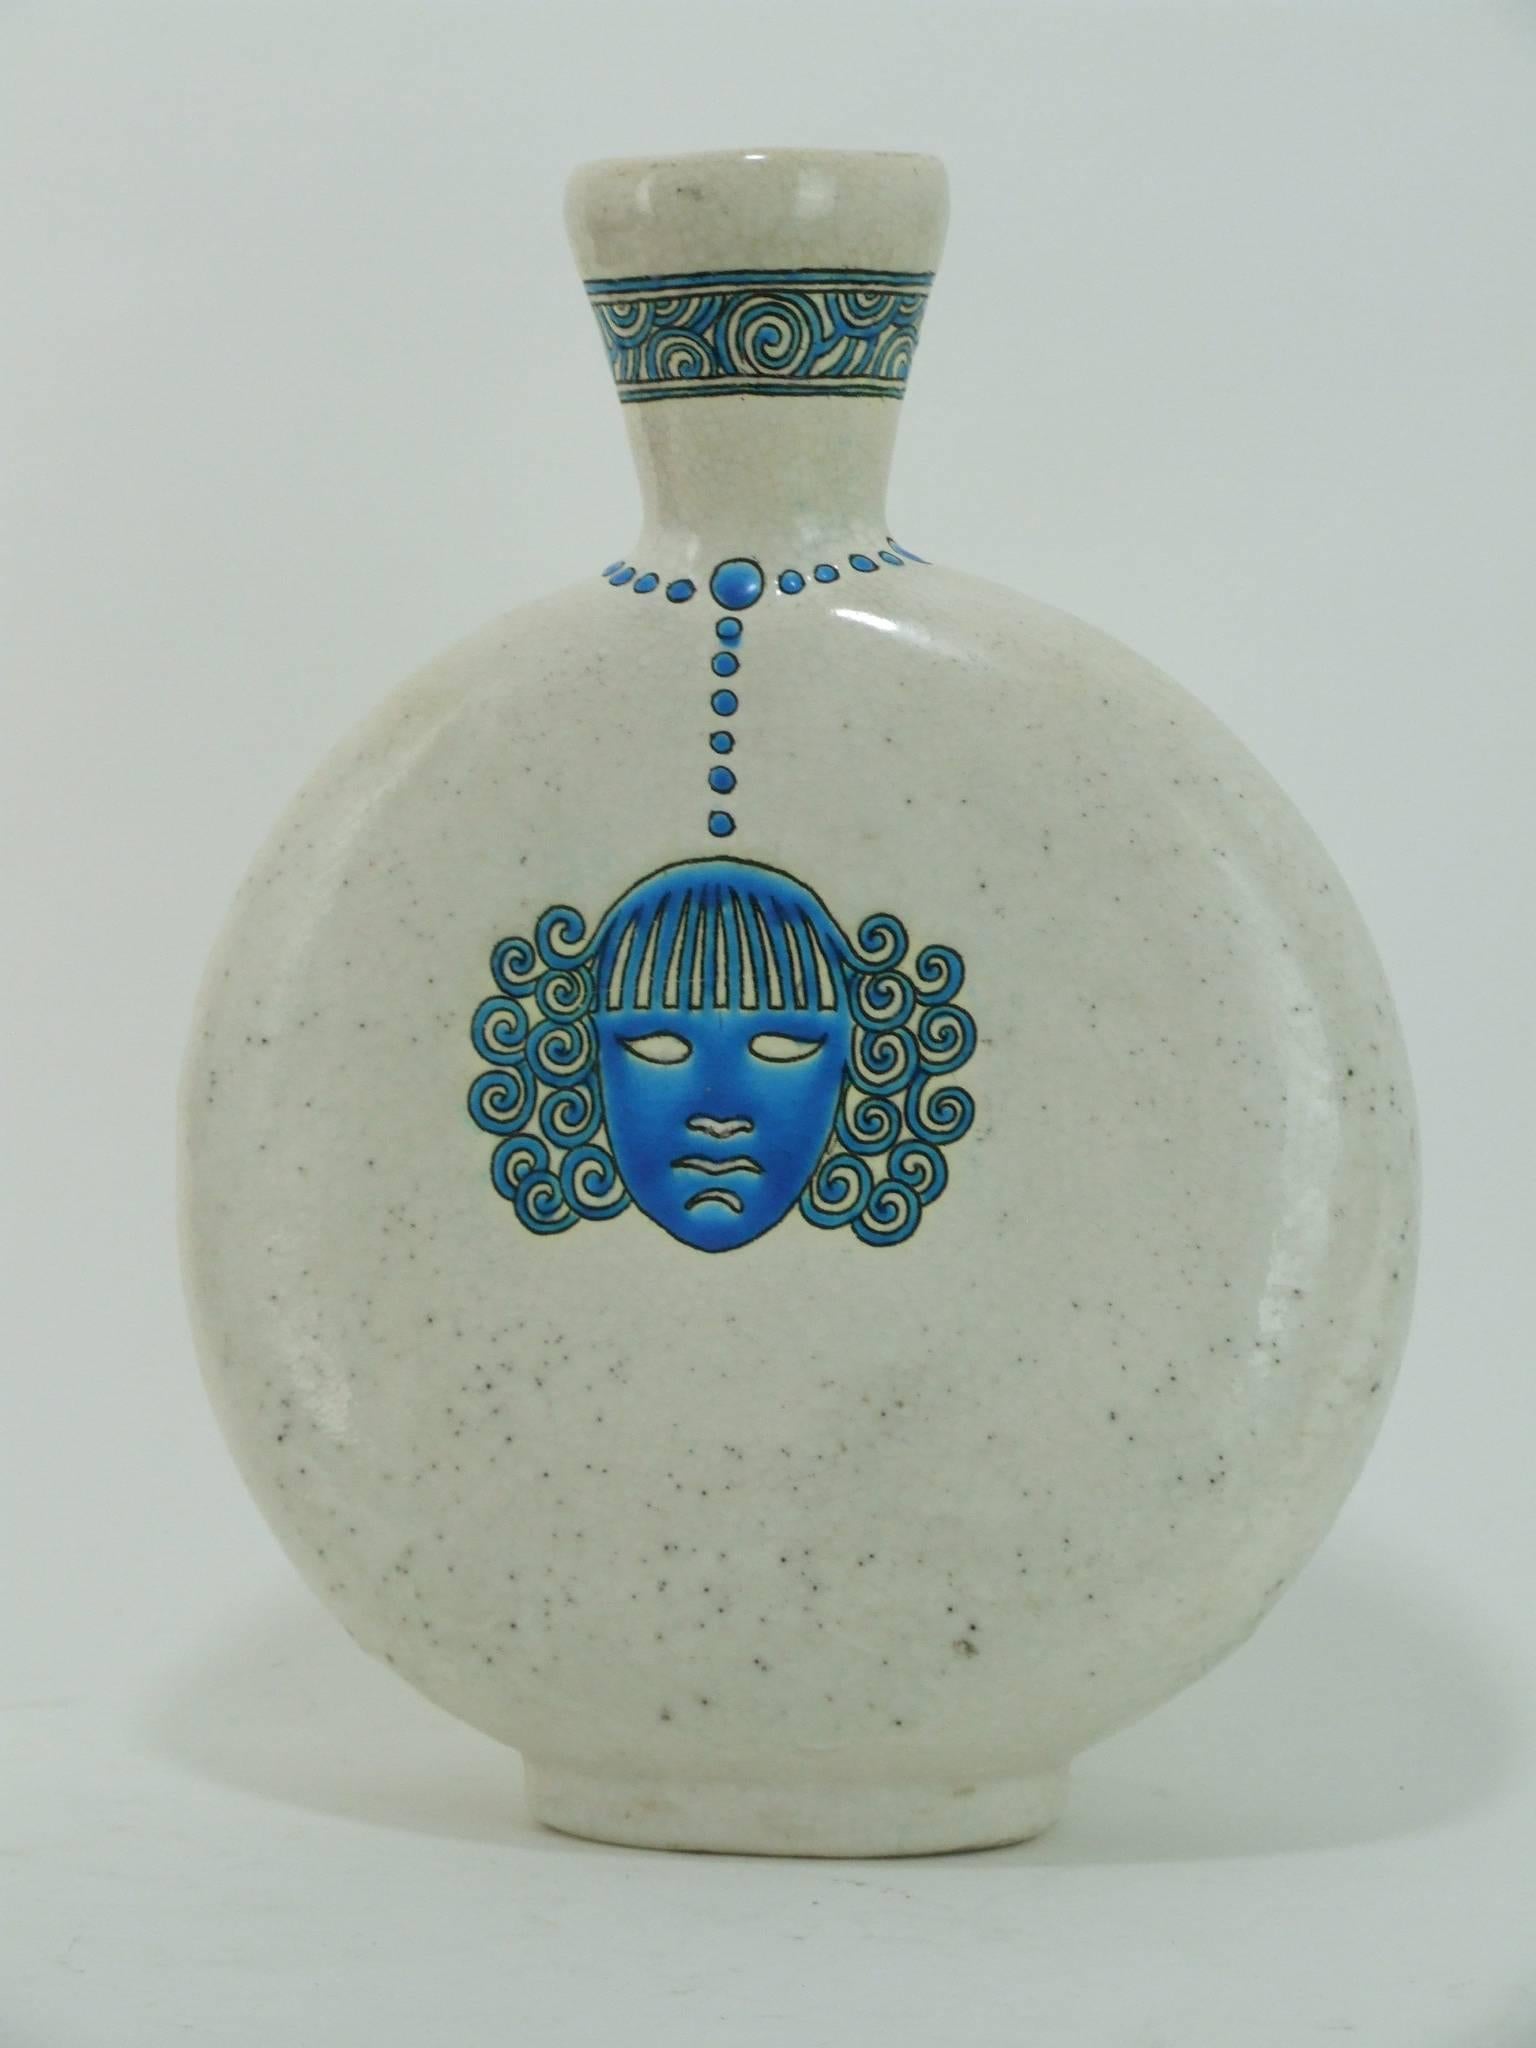 A flat crackle glaze French ceramic vase of flat rounded form with blue glaze face detail to both sides. Marked to the base with the Longwy, France stamp. It measures 12 inches (30cm) high and 9 inches (23cm) wide. Very good original condition.